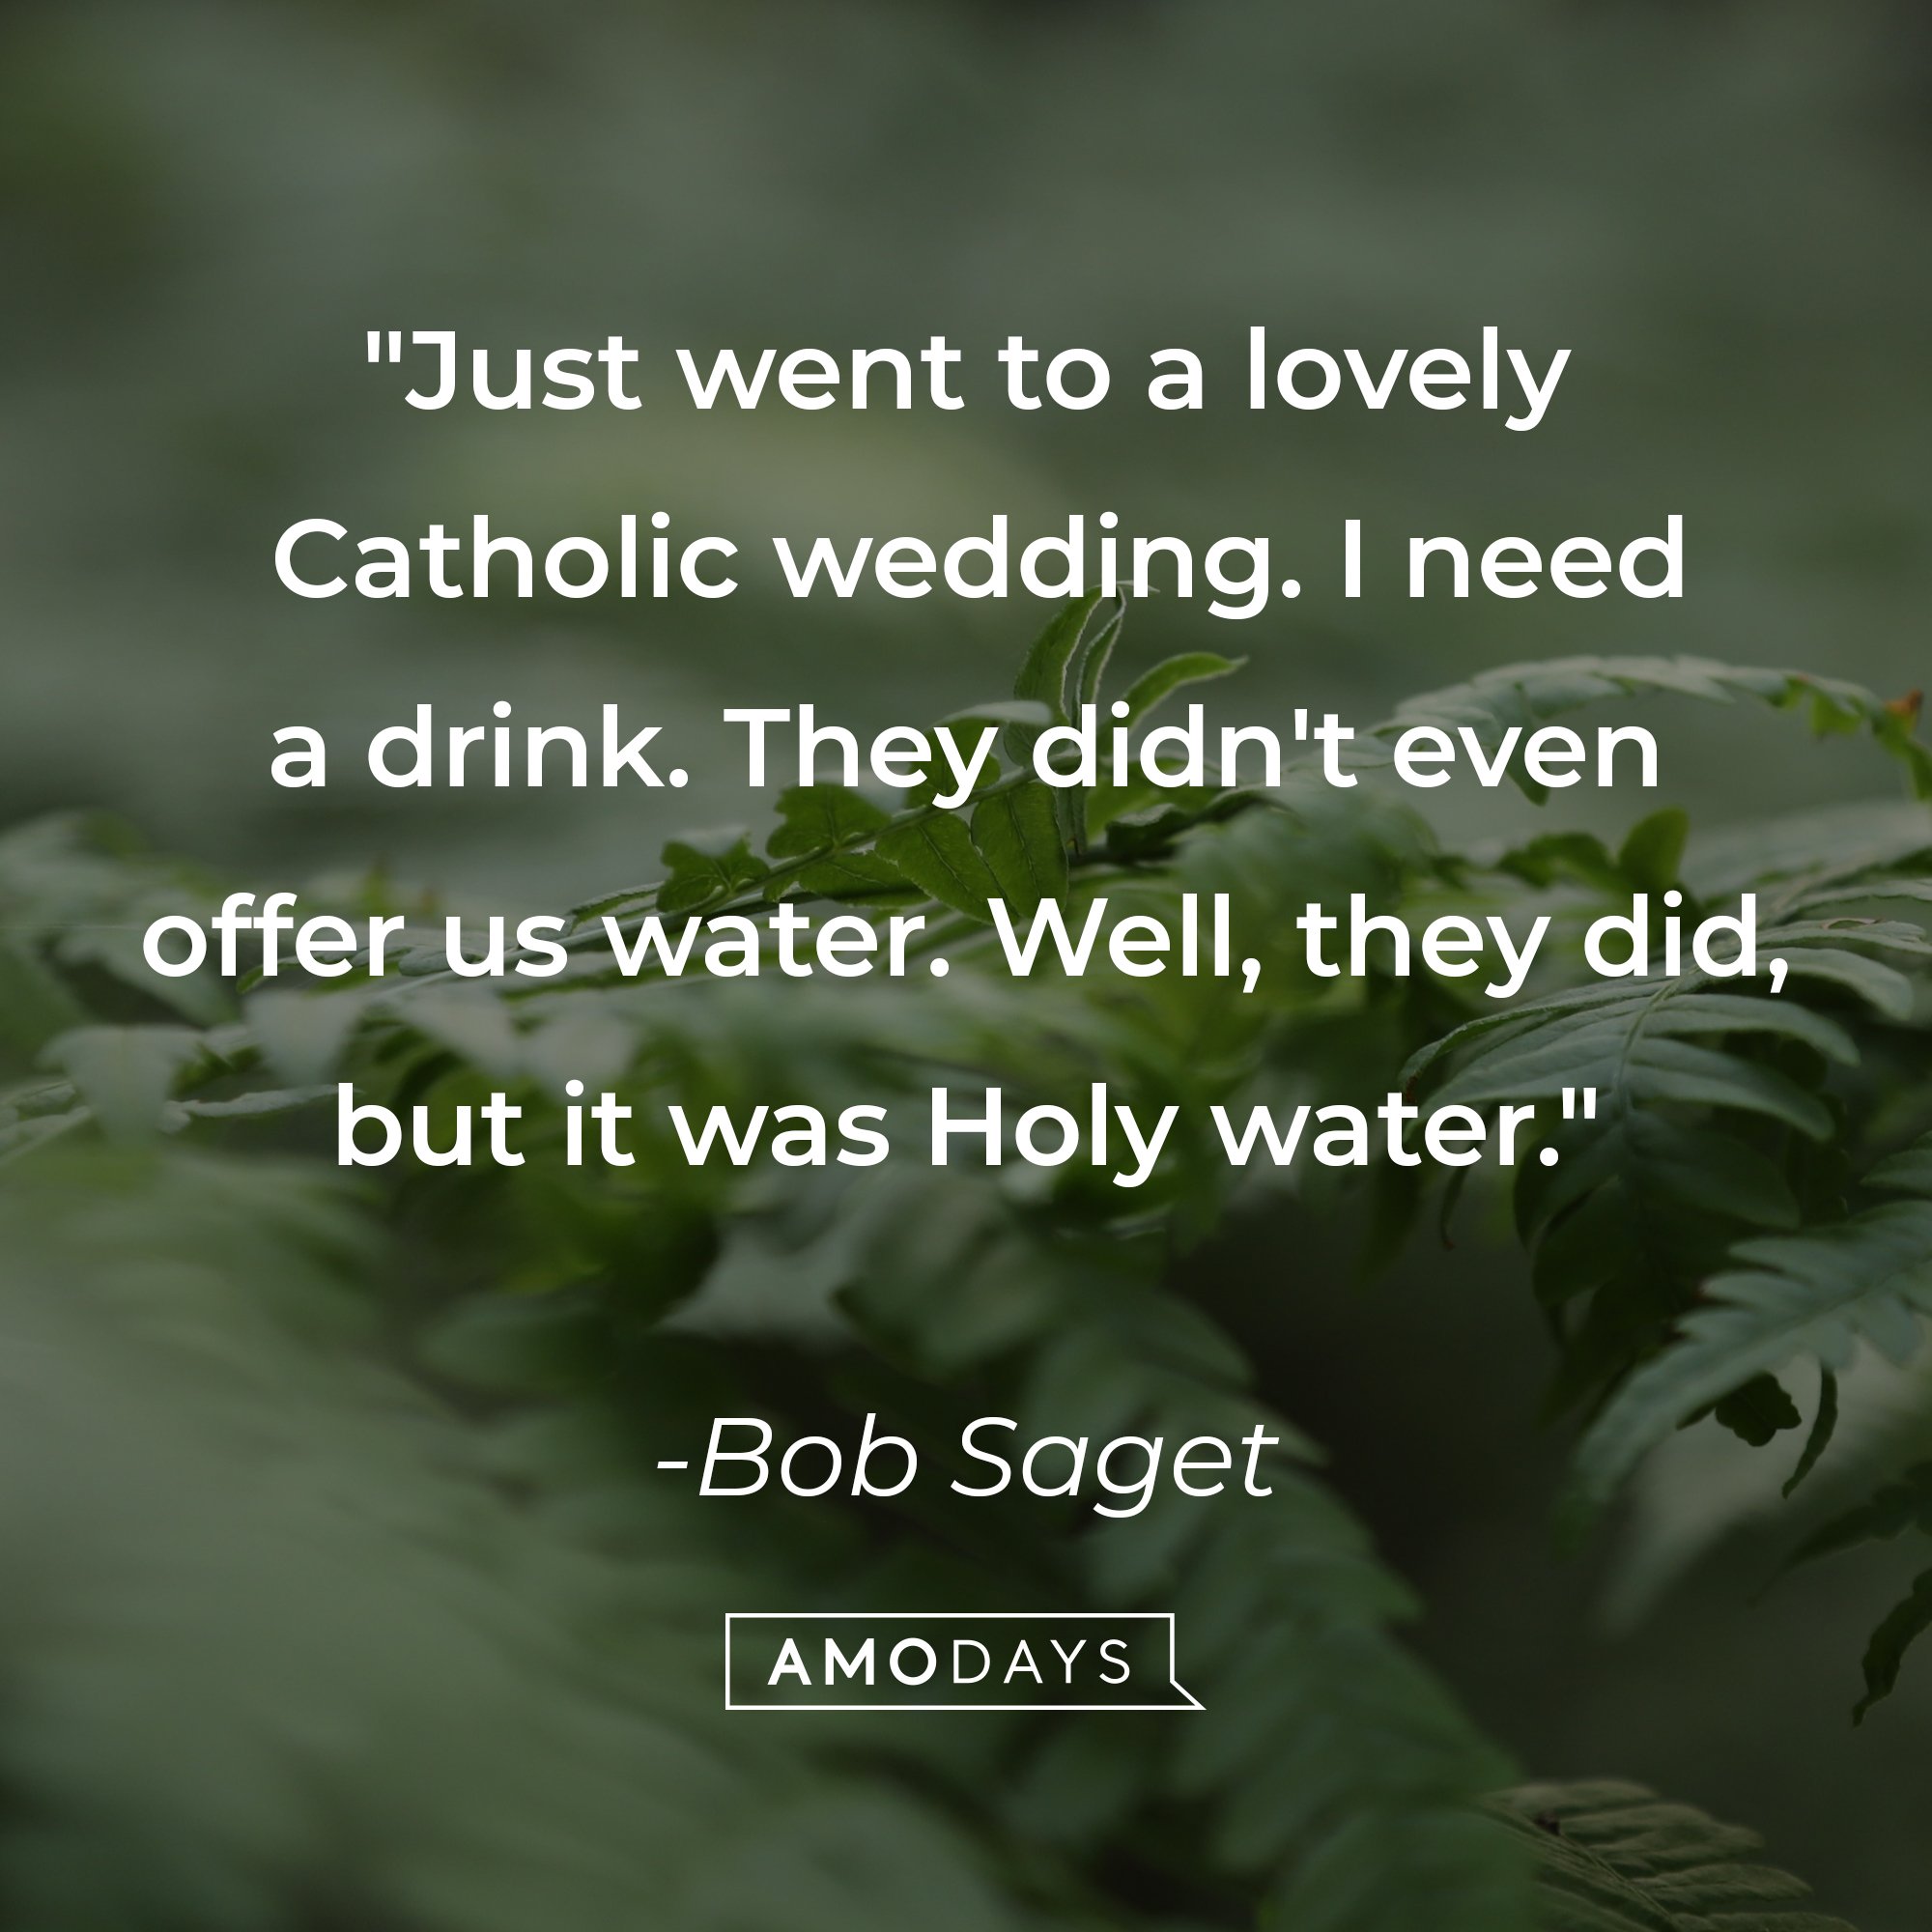  Bob Saget’s quote: "Just went to a lovely Catholic wedding. I need a drink. They didn't even offer us water. Well, they did, but it was Holy water." | Image: AmoDays